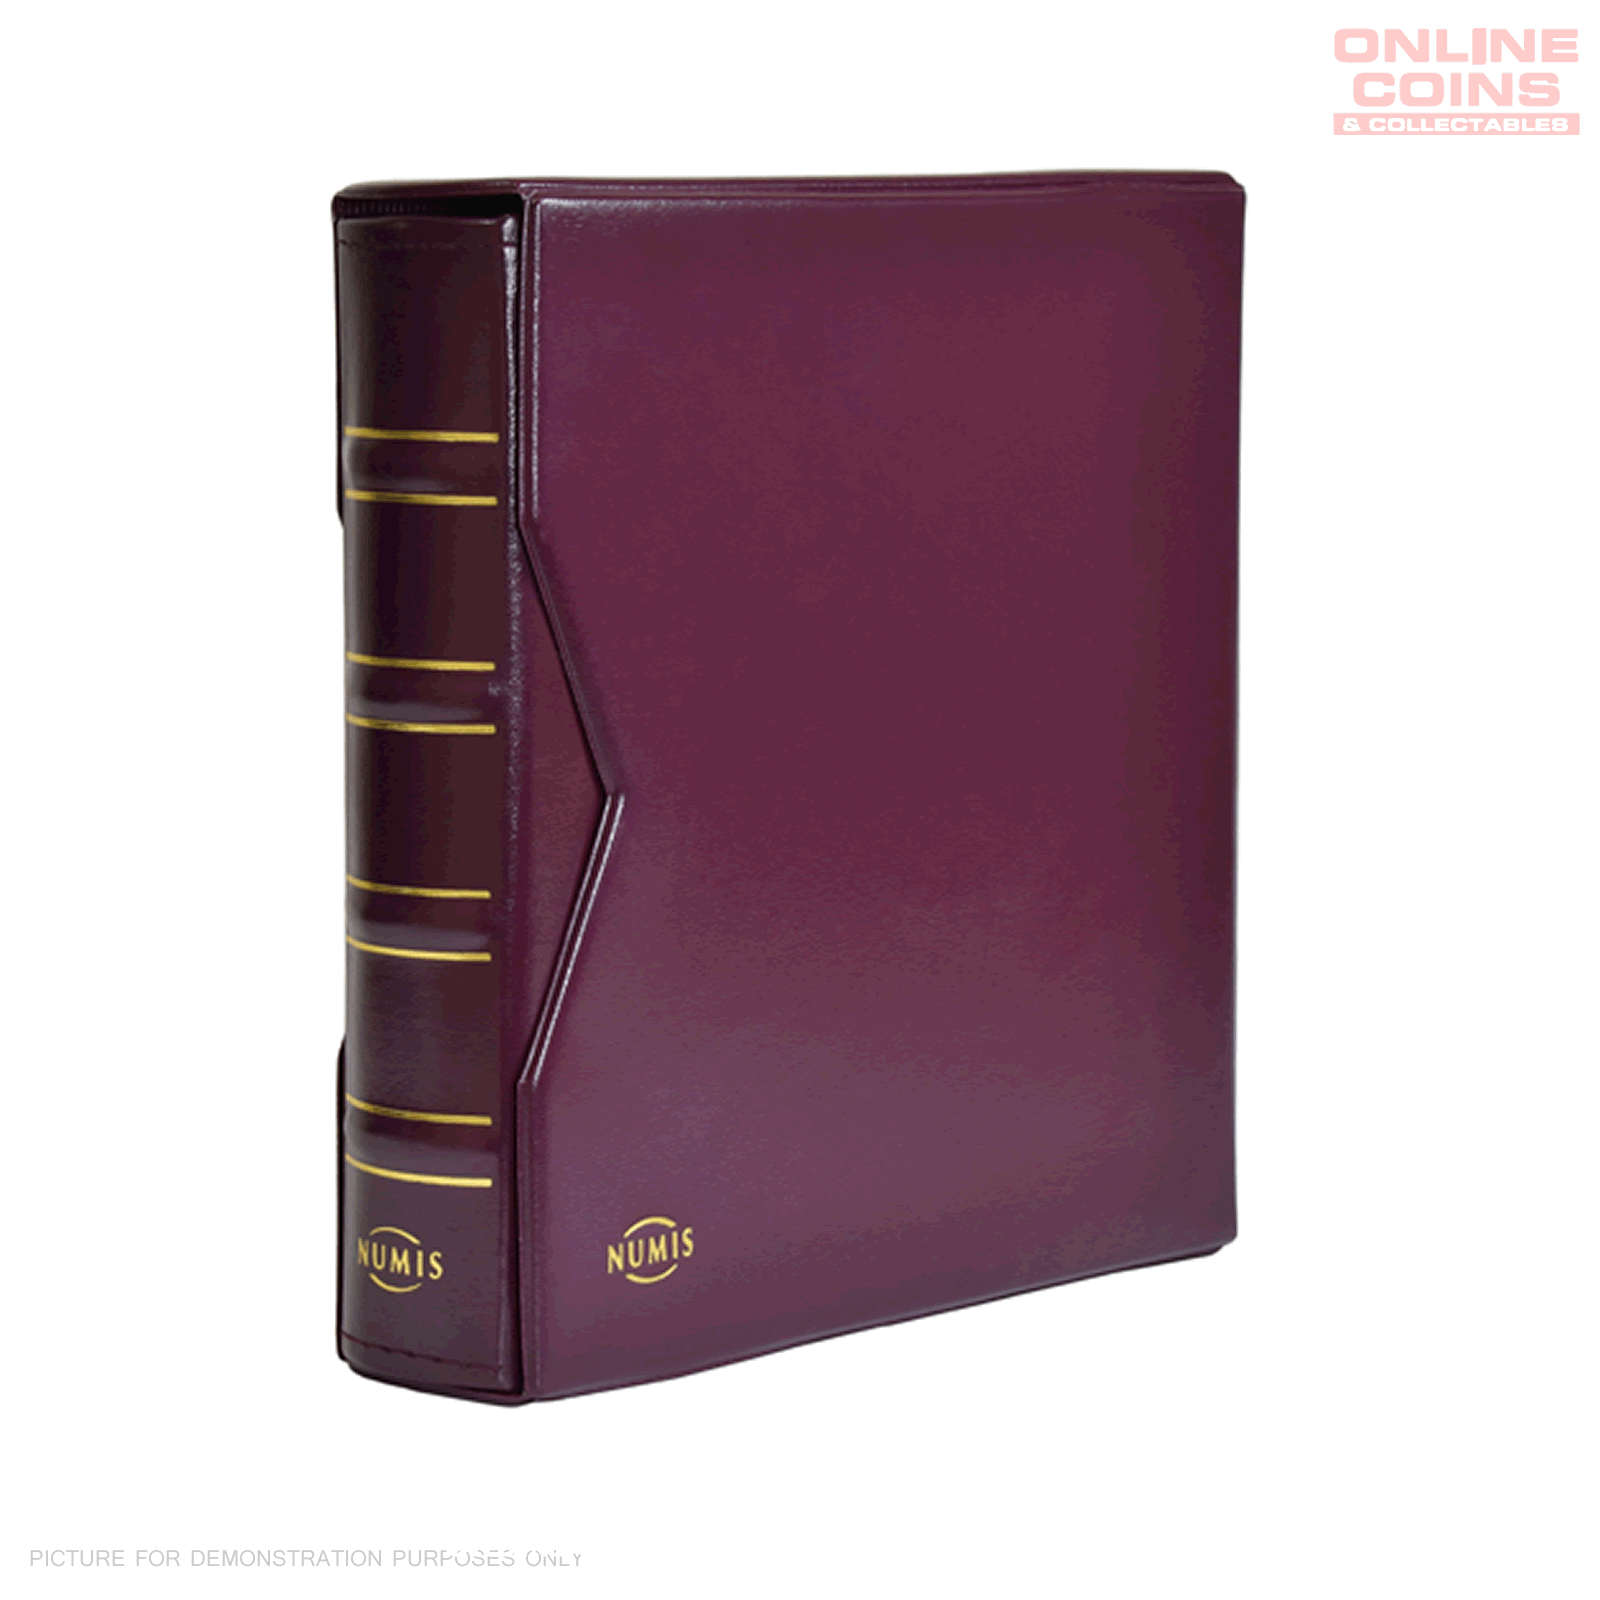 Lighthouse - Classic Numis Coin and Banknote Album With Slipcase - RED